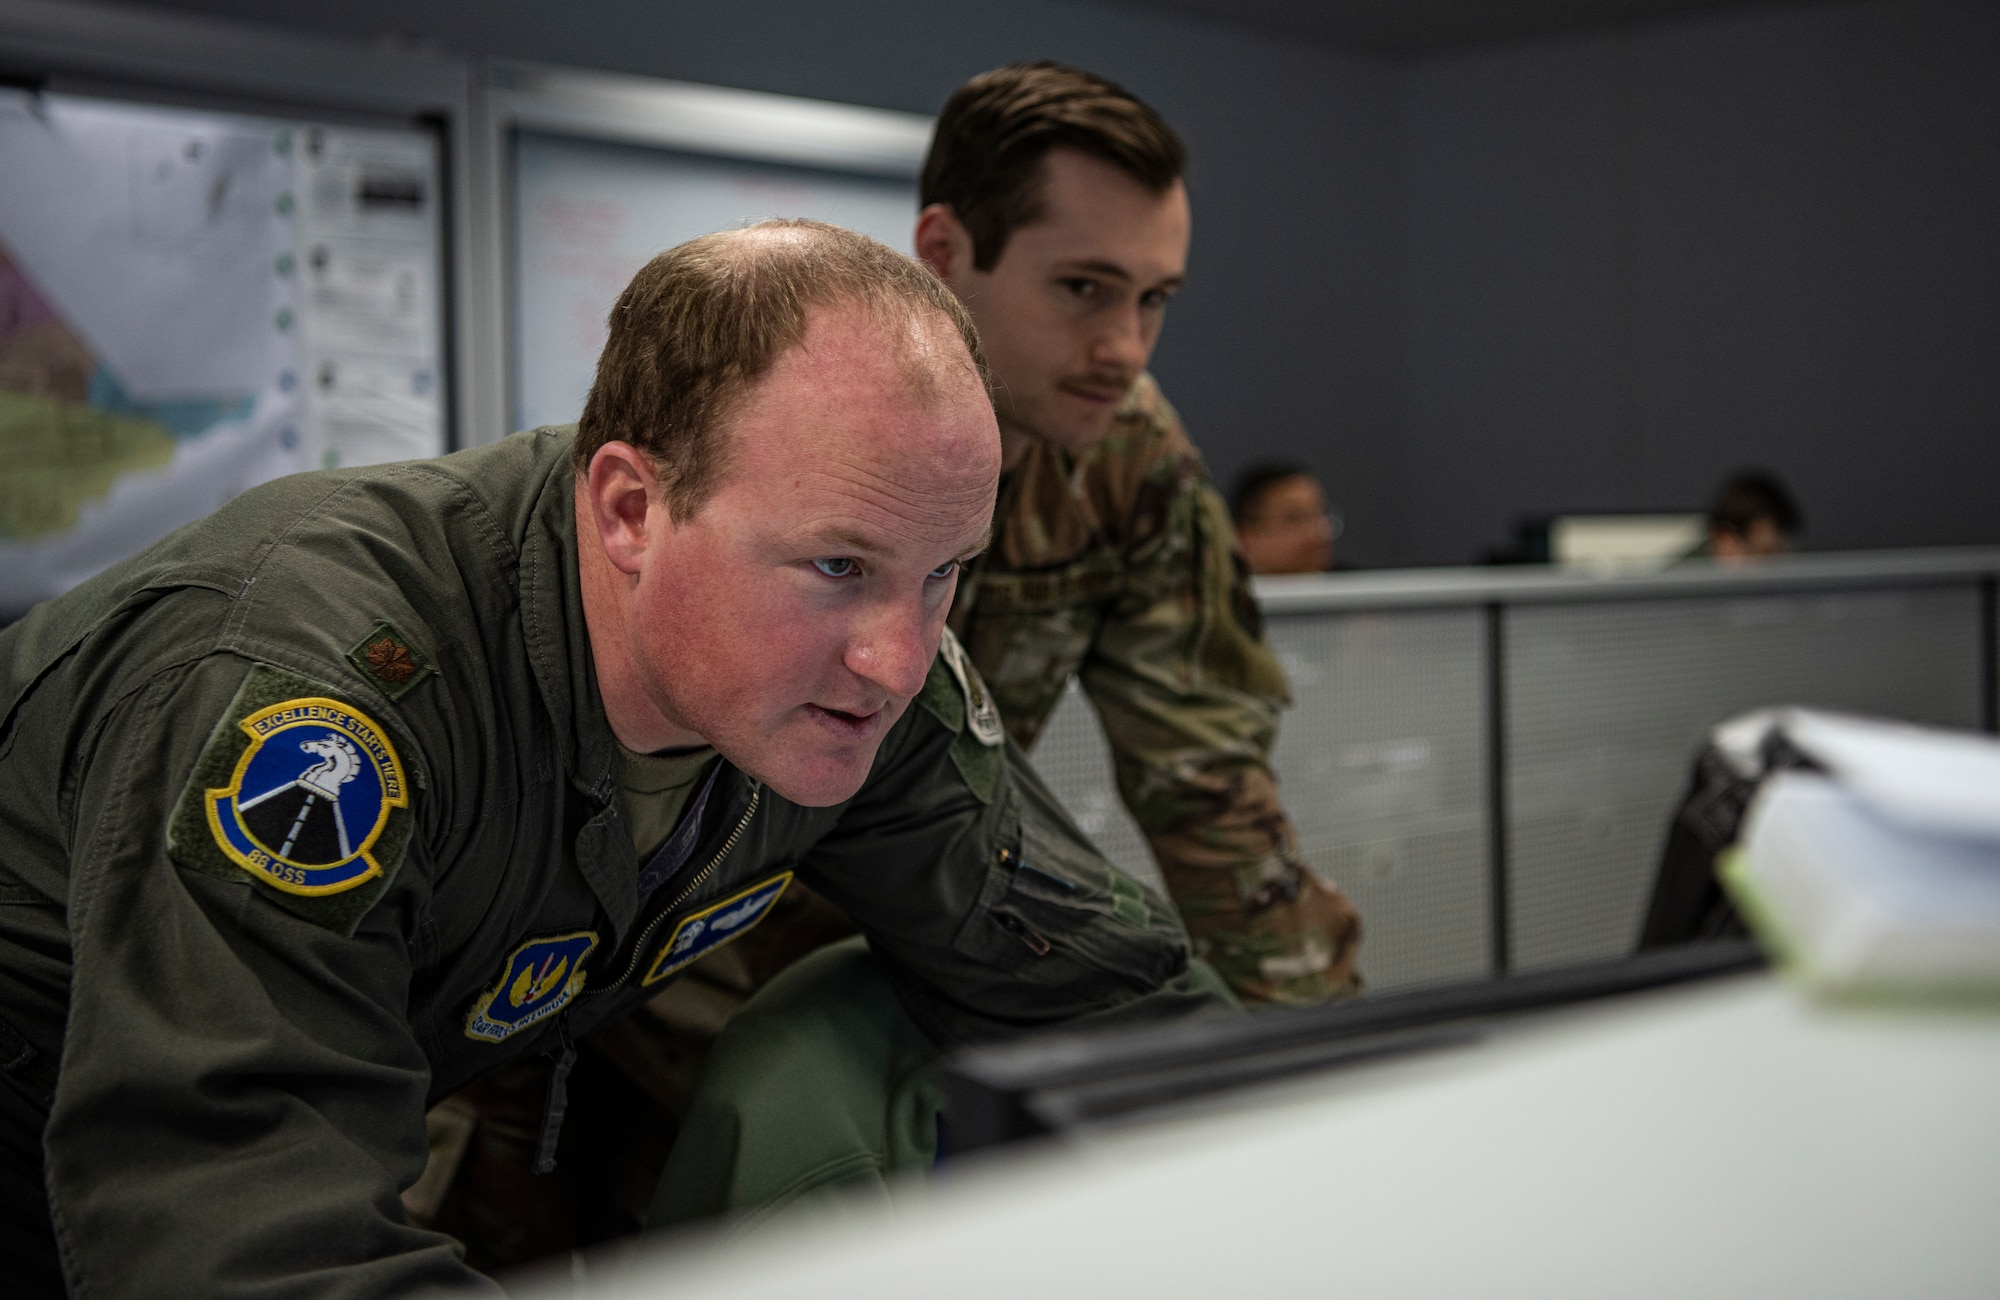 U.S. Air Force Maj. David Mackintosh, 86th Operations Support Squadron, studies information during an Operational Planning Team meeting March 24, 2020.